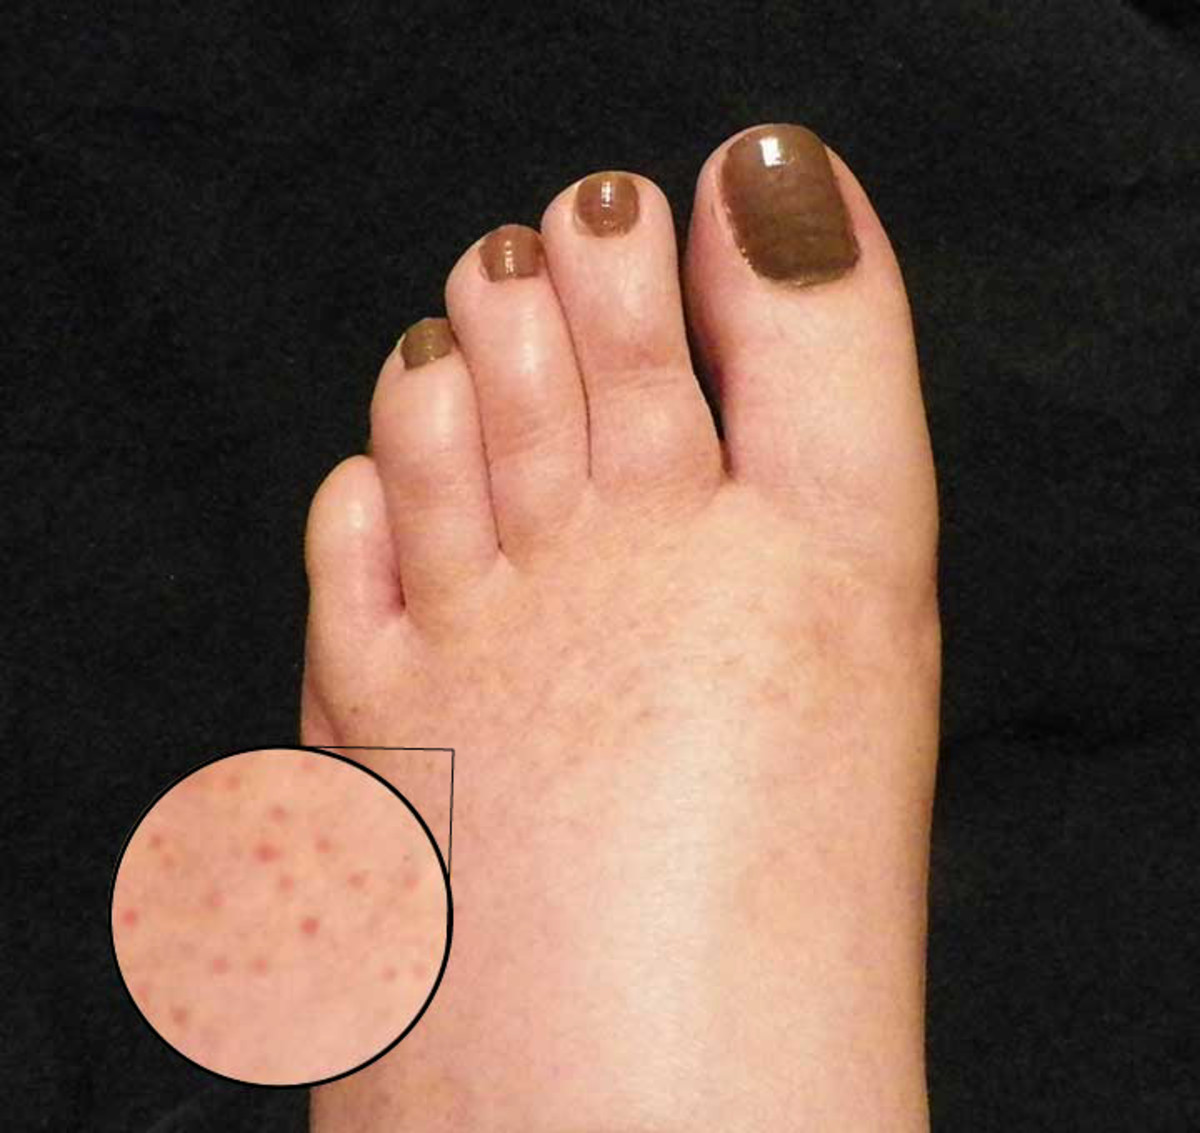 red dots on foot